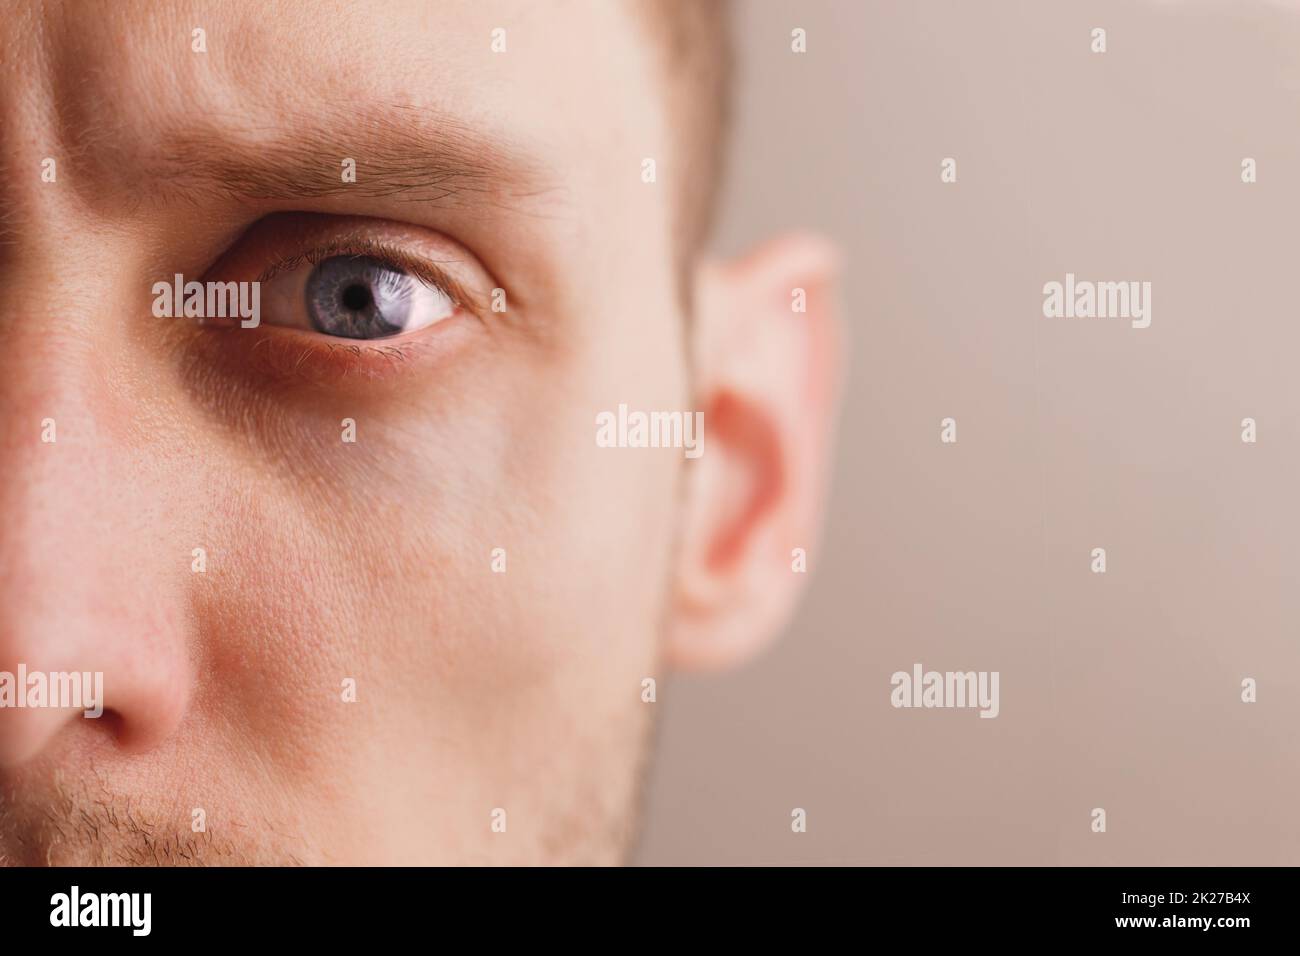 Young worried man with stern look. Close-up portrait half face Stock Photo